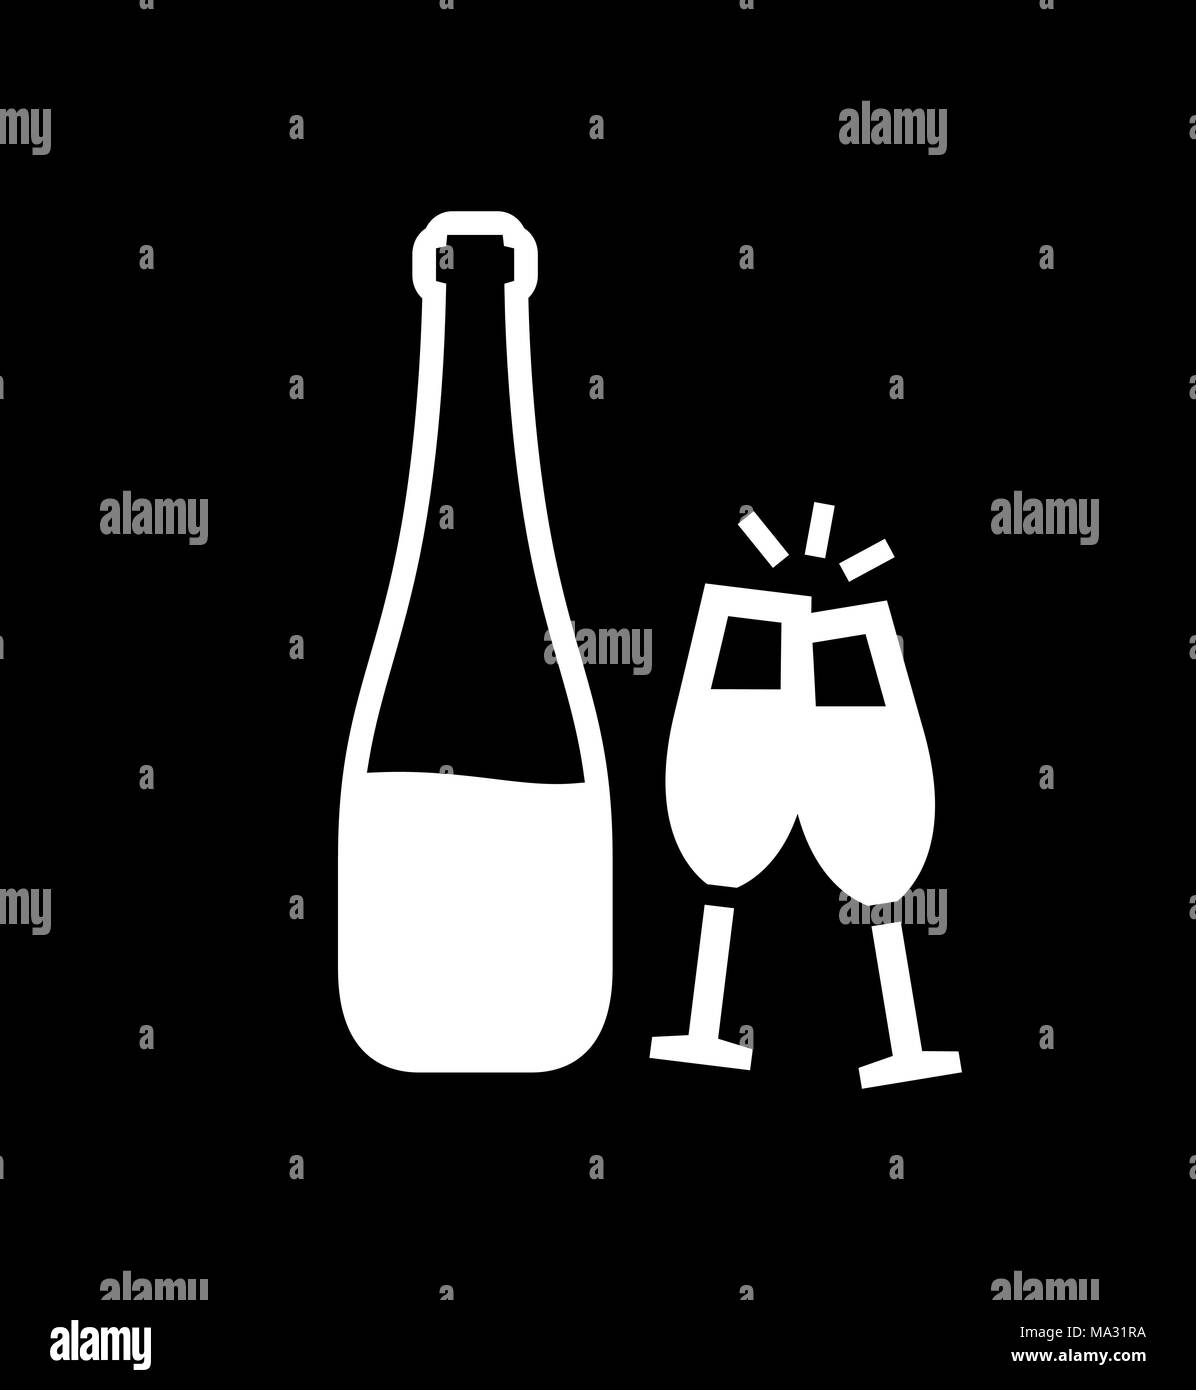 Wine bottle with glasses icon simple flat style illustration. Stock Vector